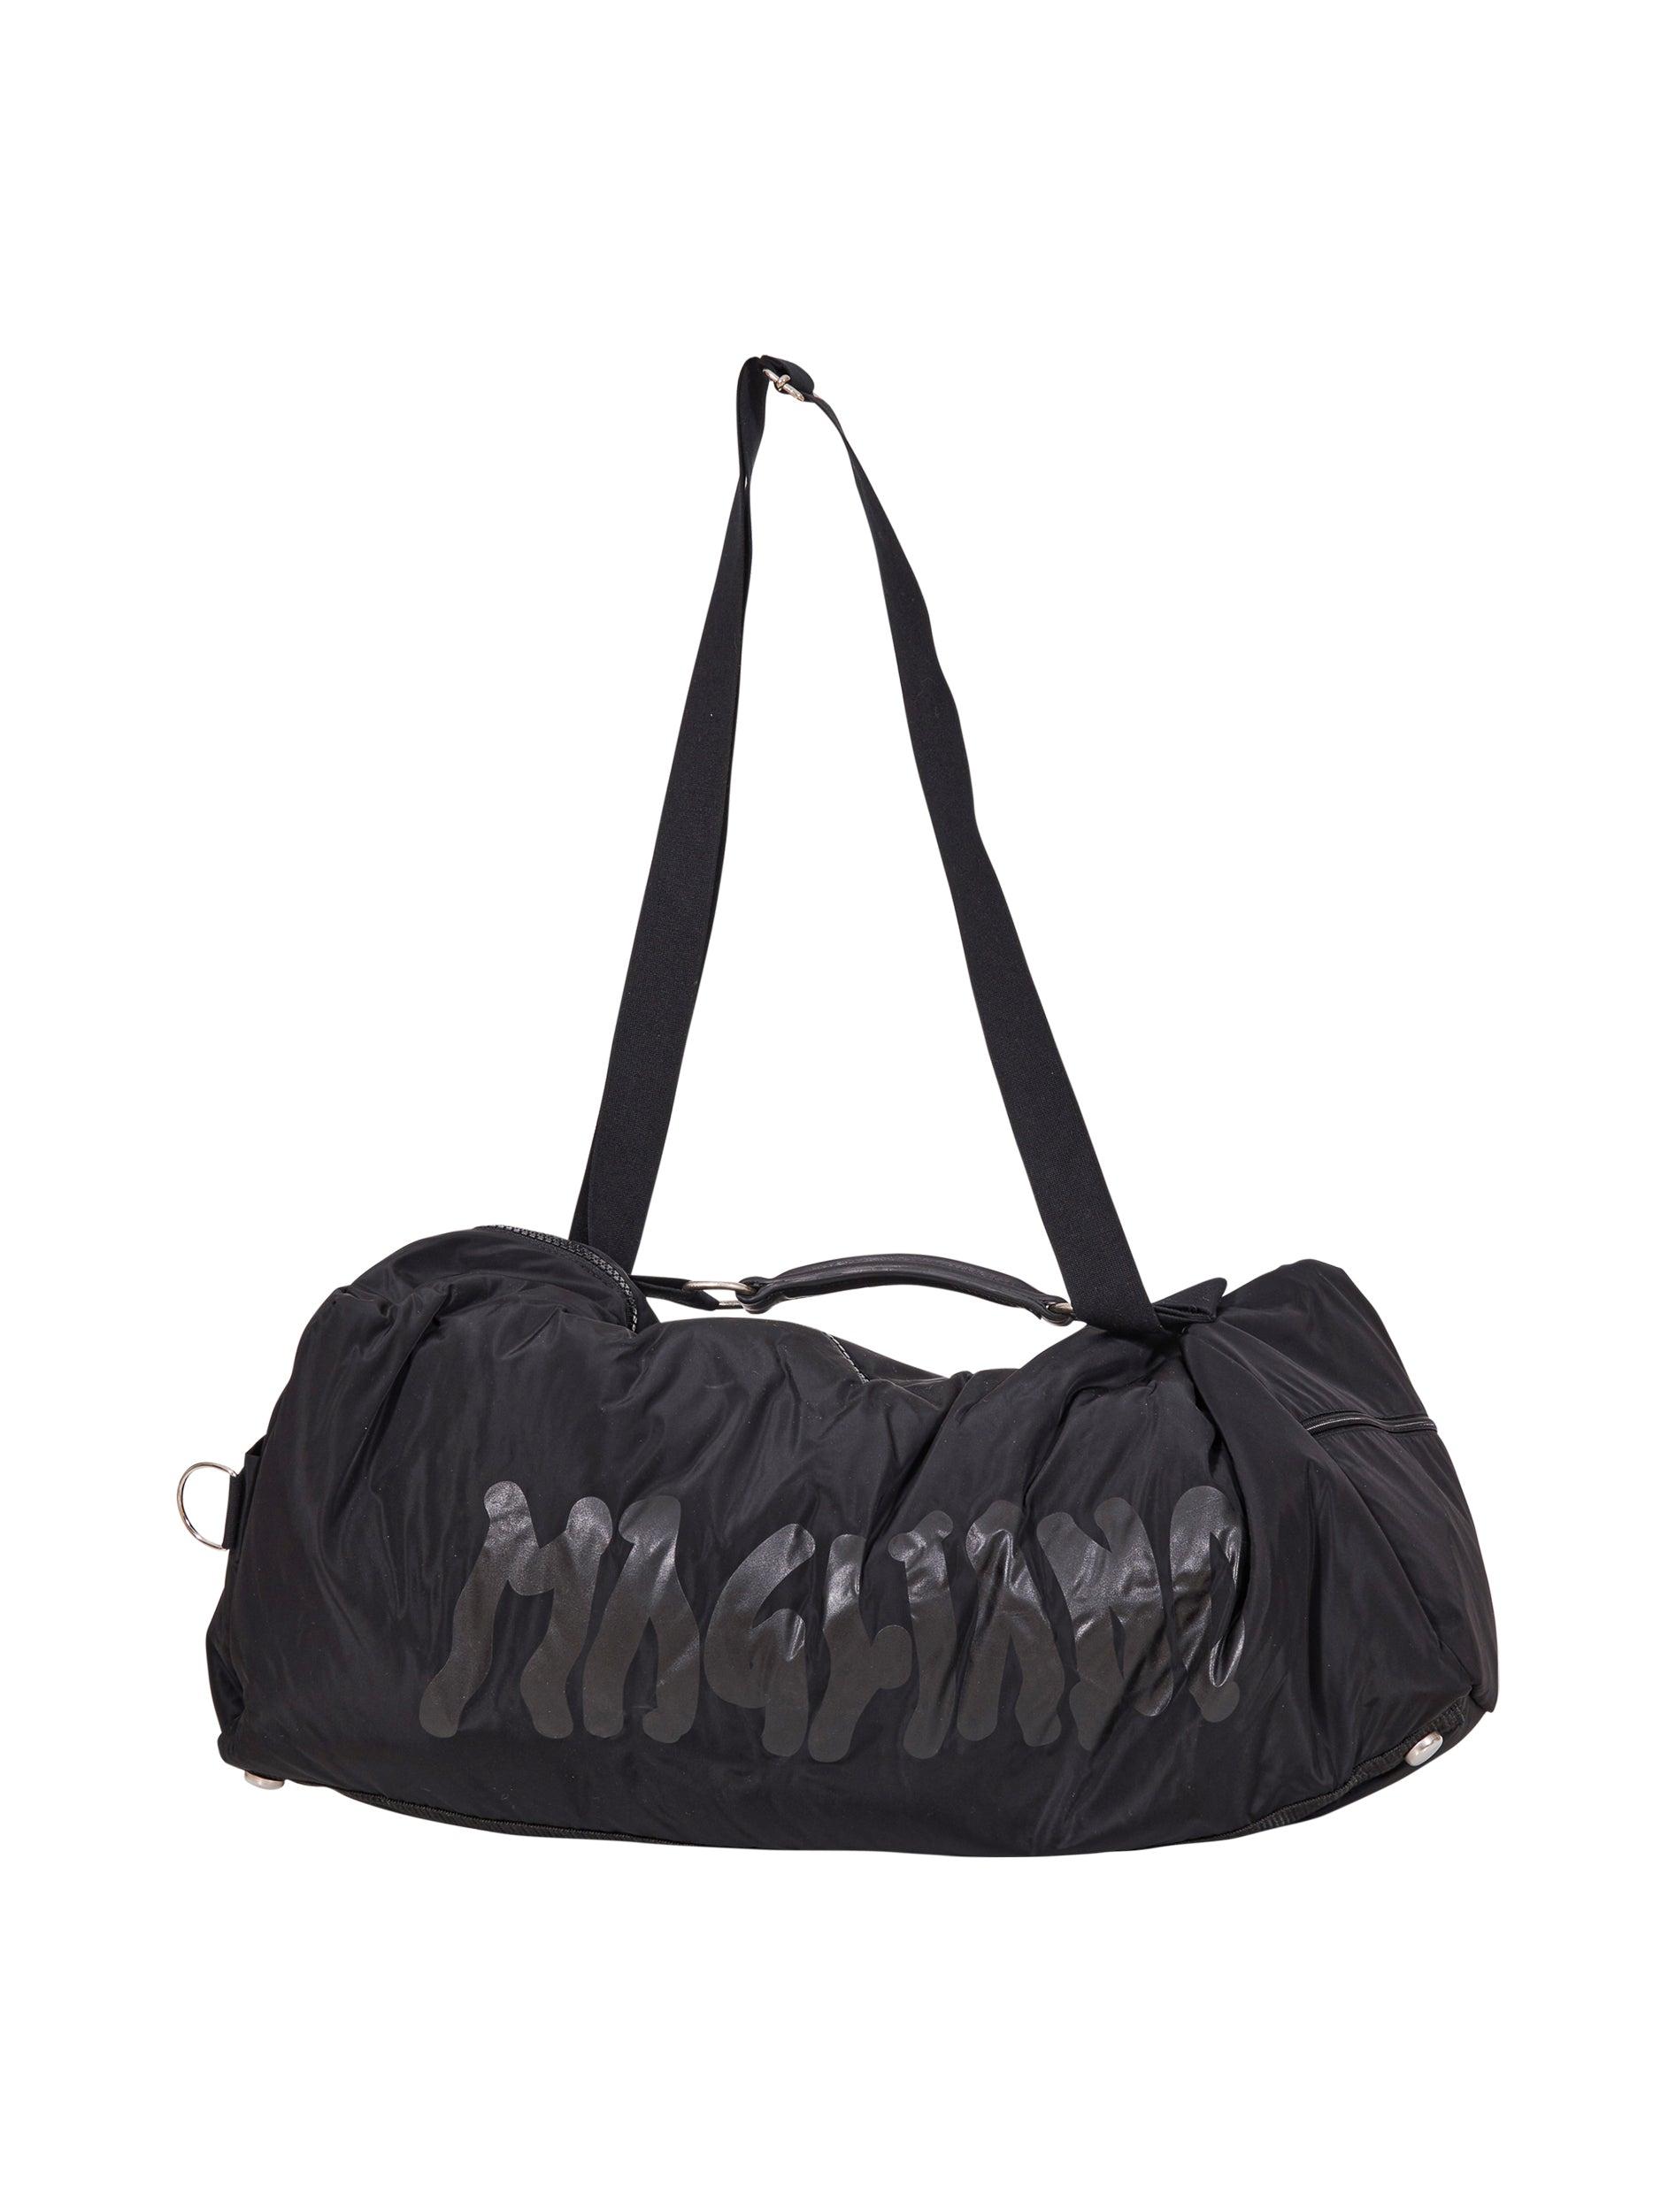 Magliano Robbery Bag in Black | Lyst